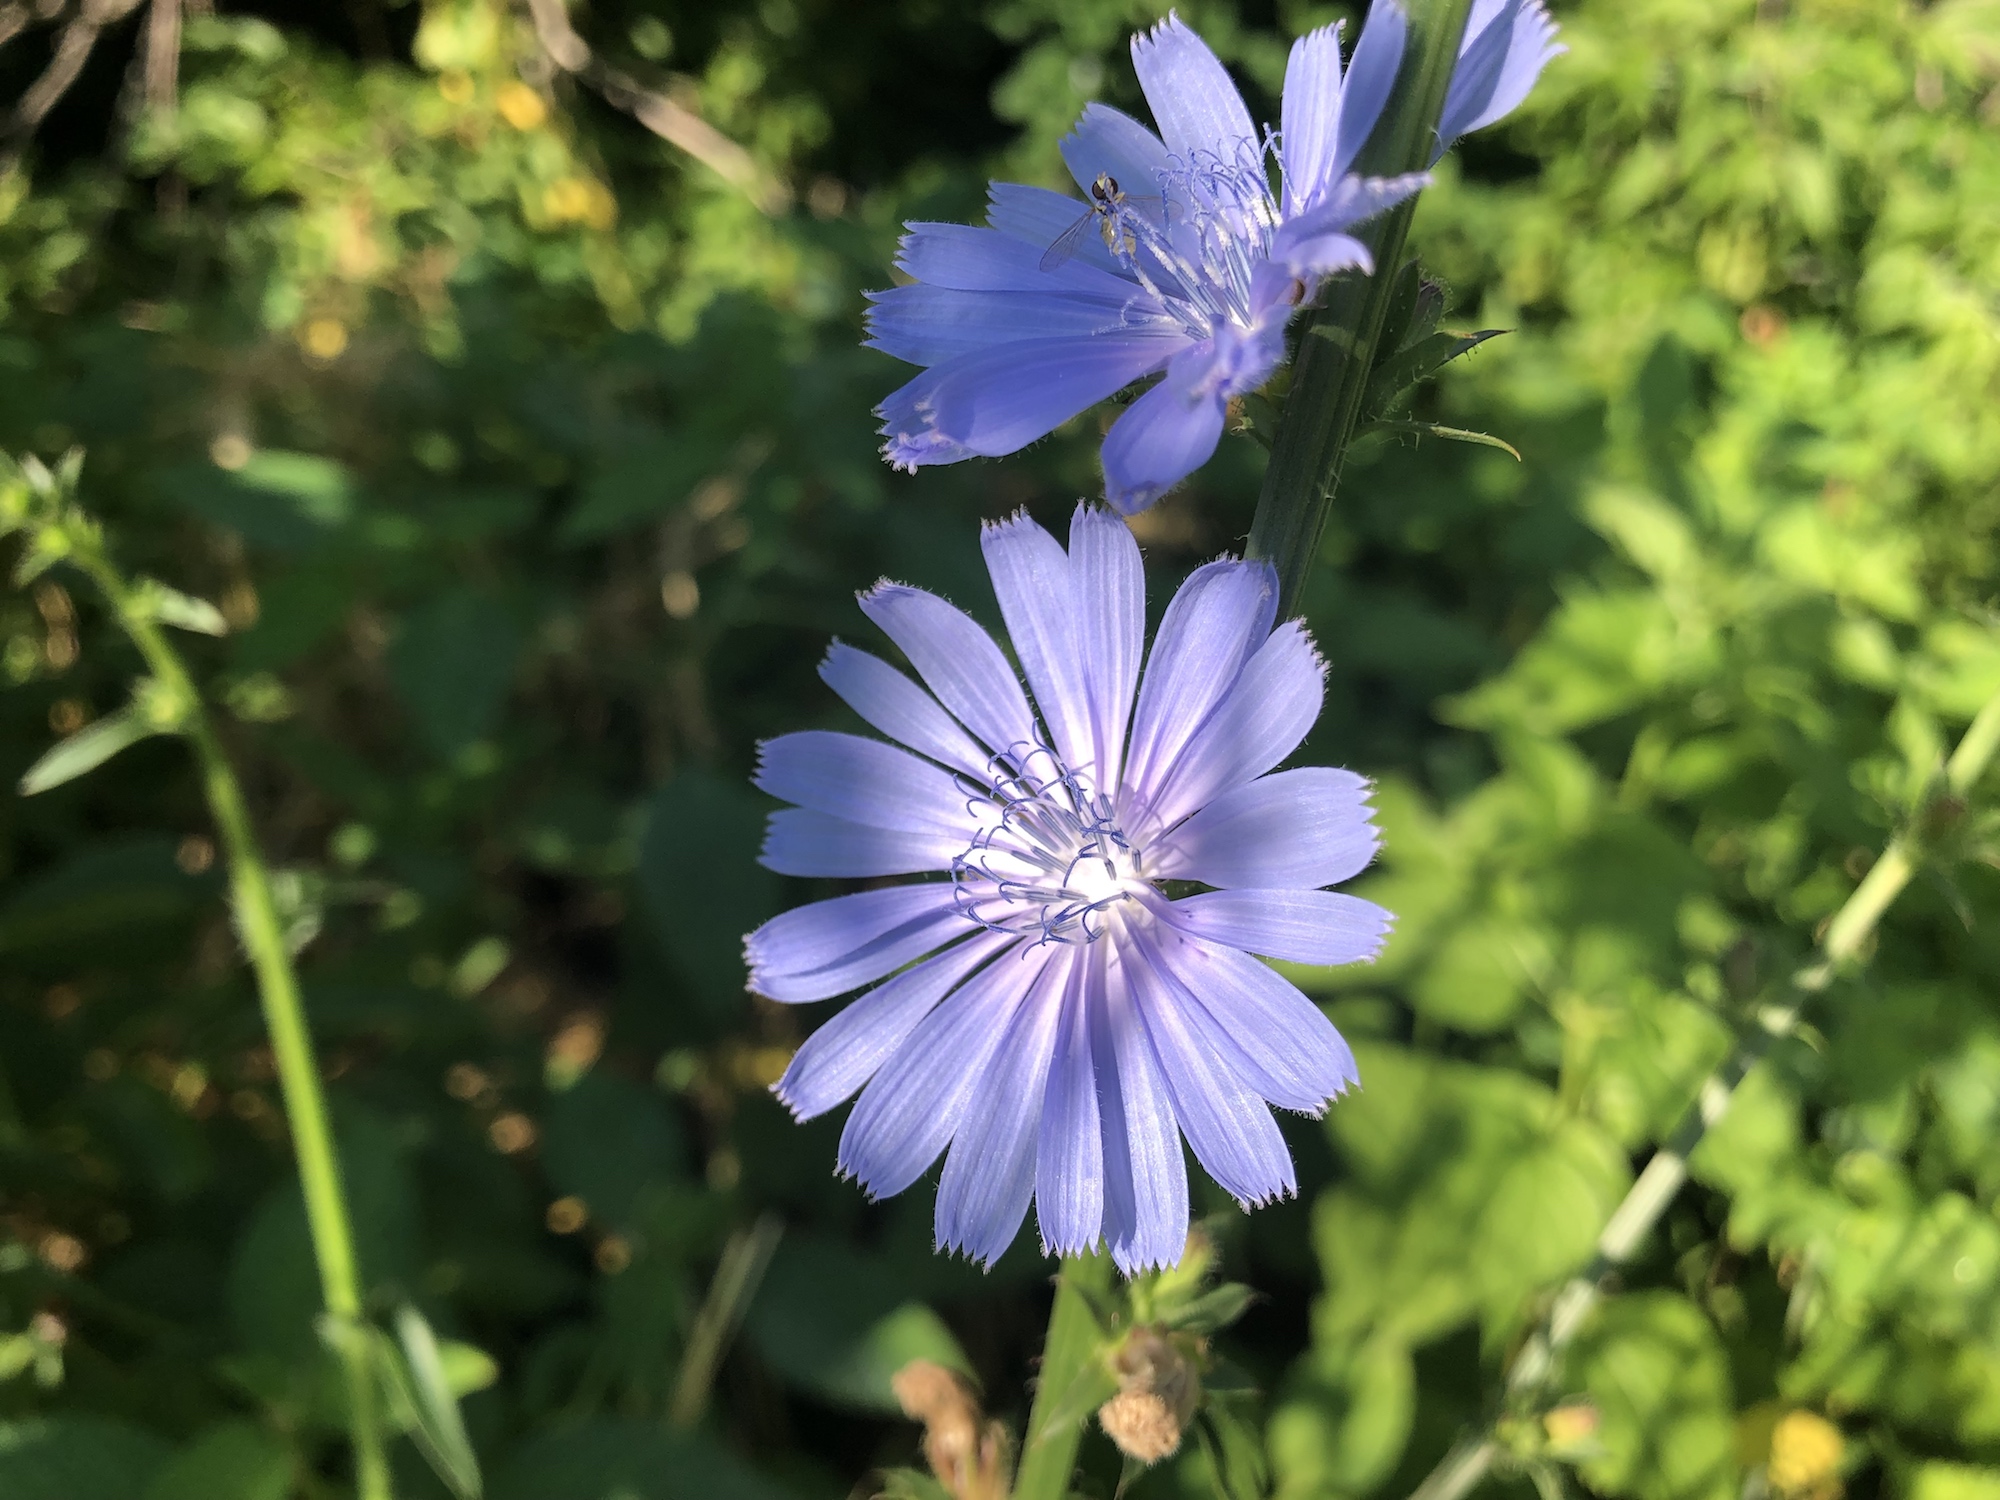 Chicory in Marion Dunn Prairie in Madison, Wisconsin on July 12, 2019.